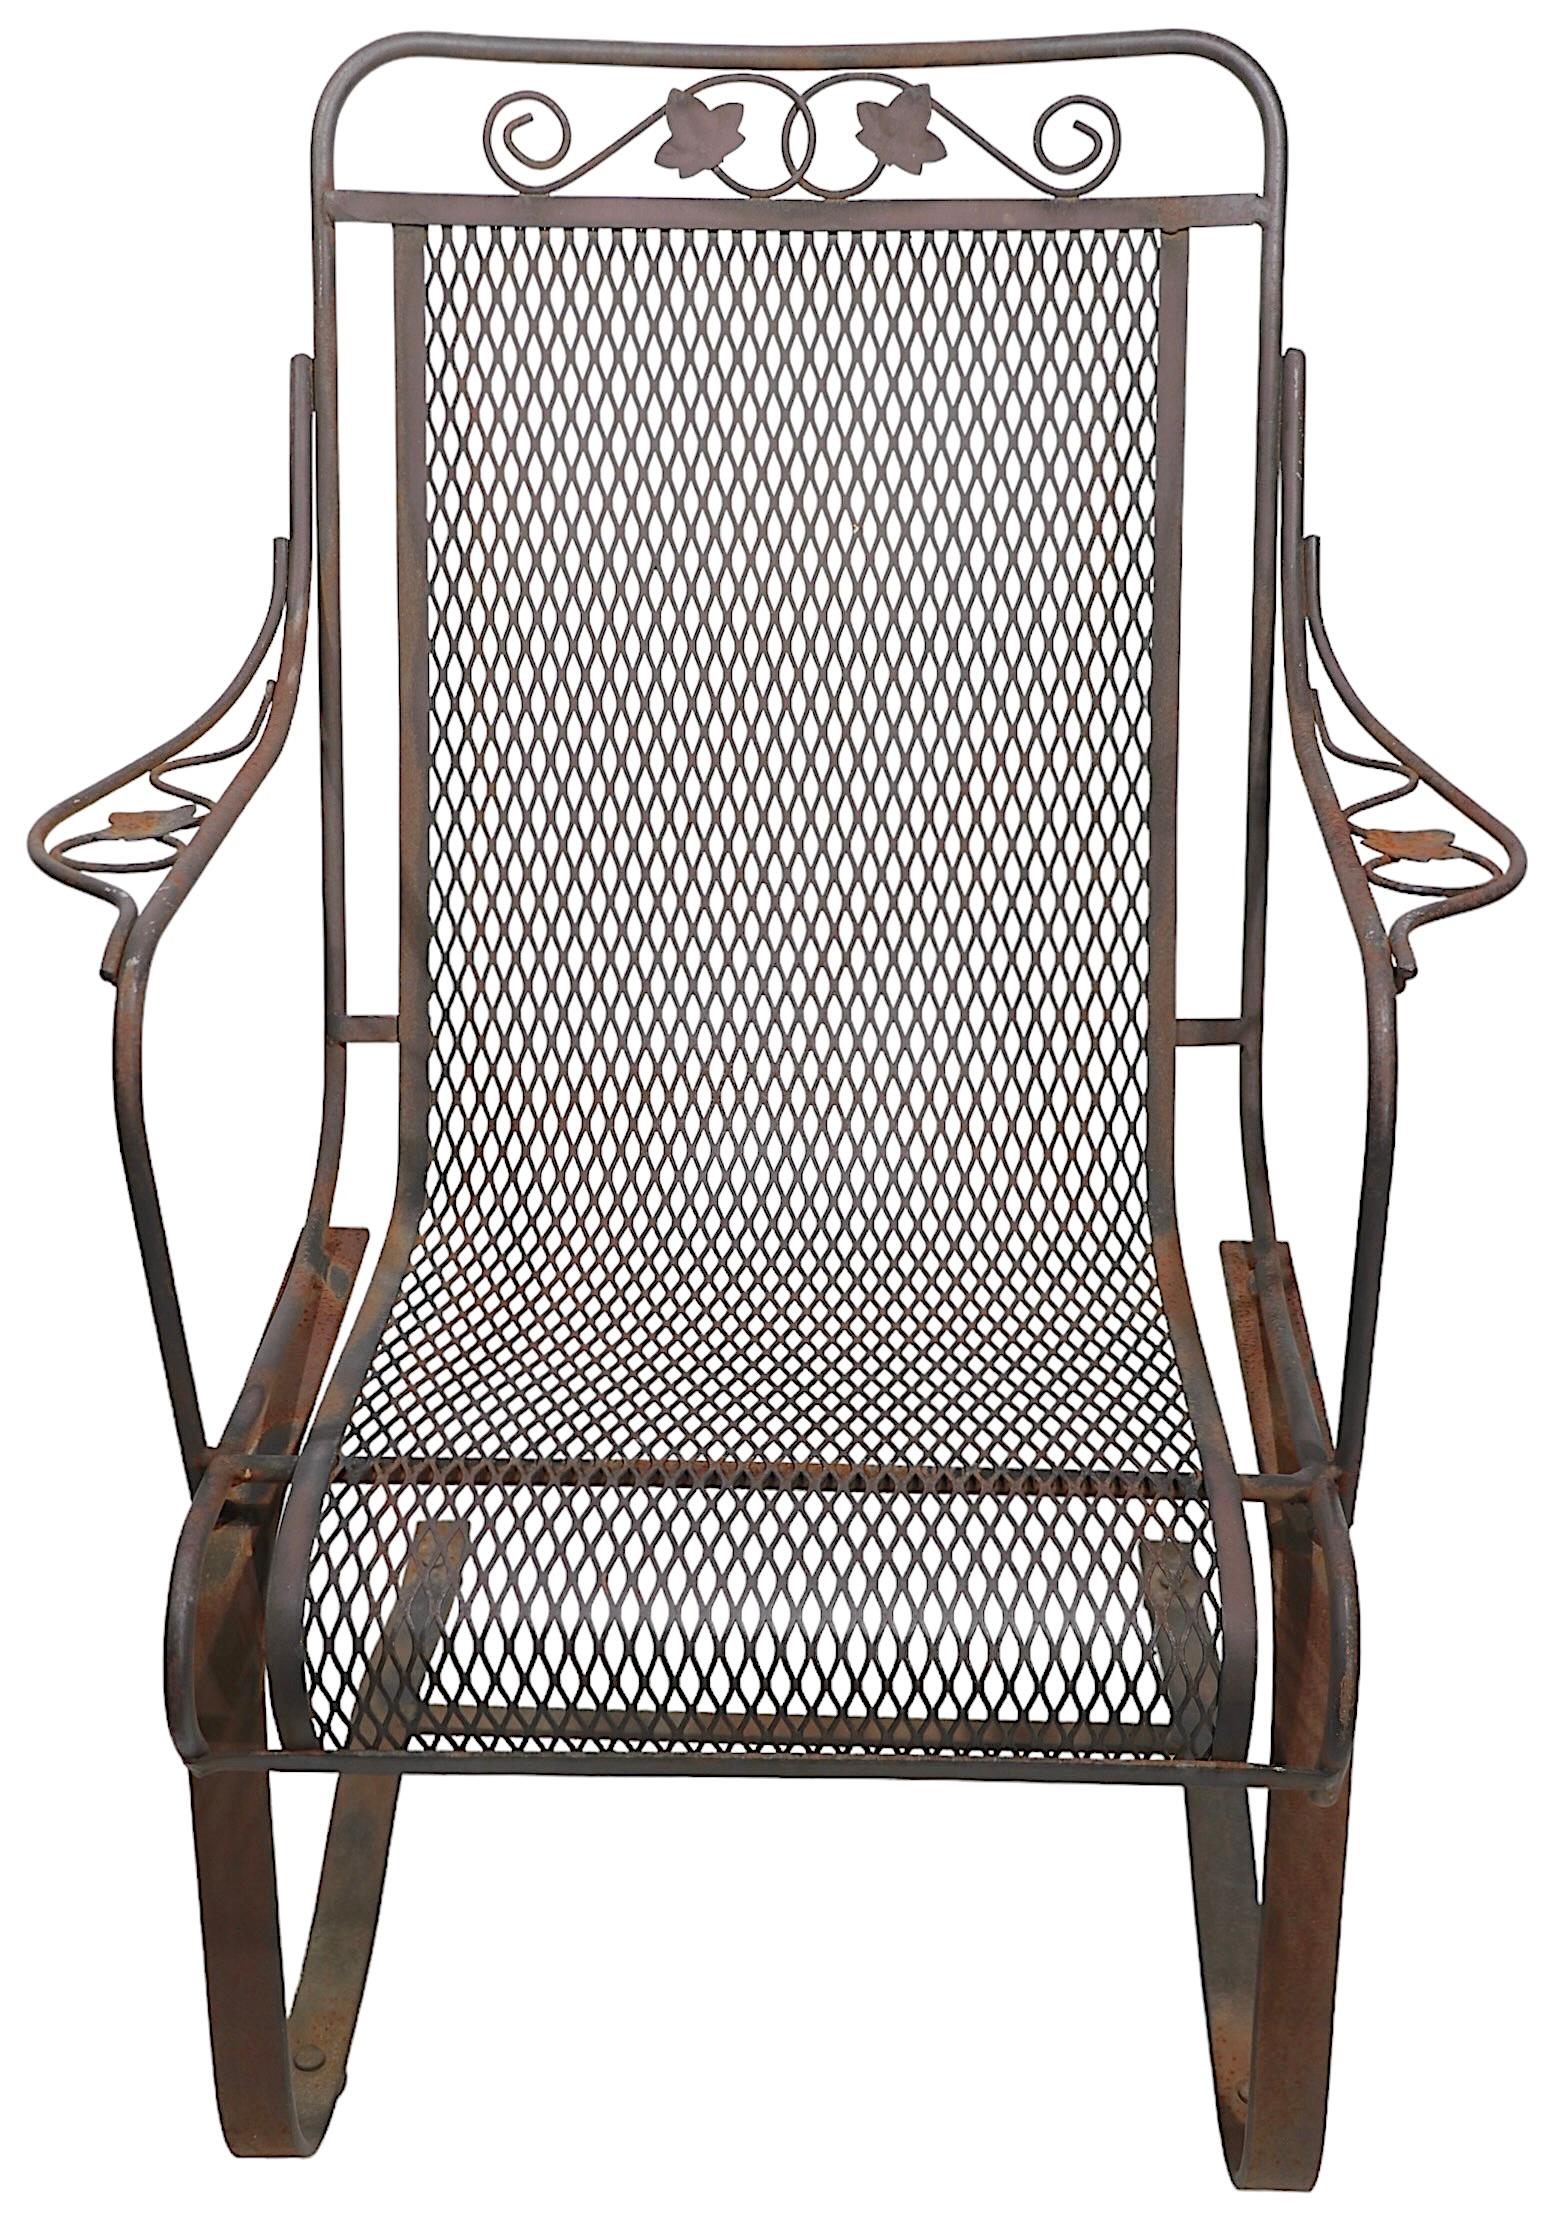 Wrought Iron Cantilevered High Back Lounge Garden Patio Poolside Chair  1